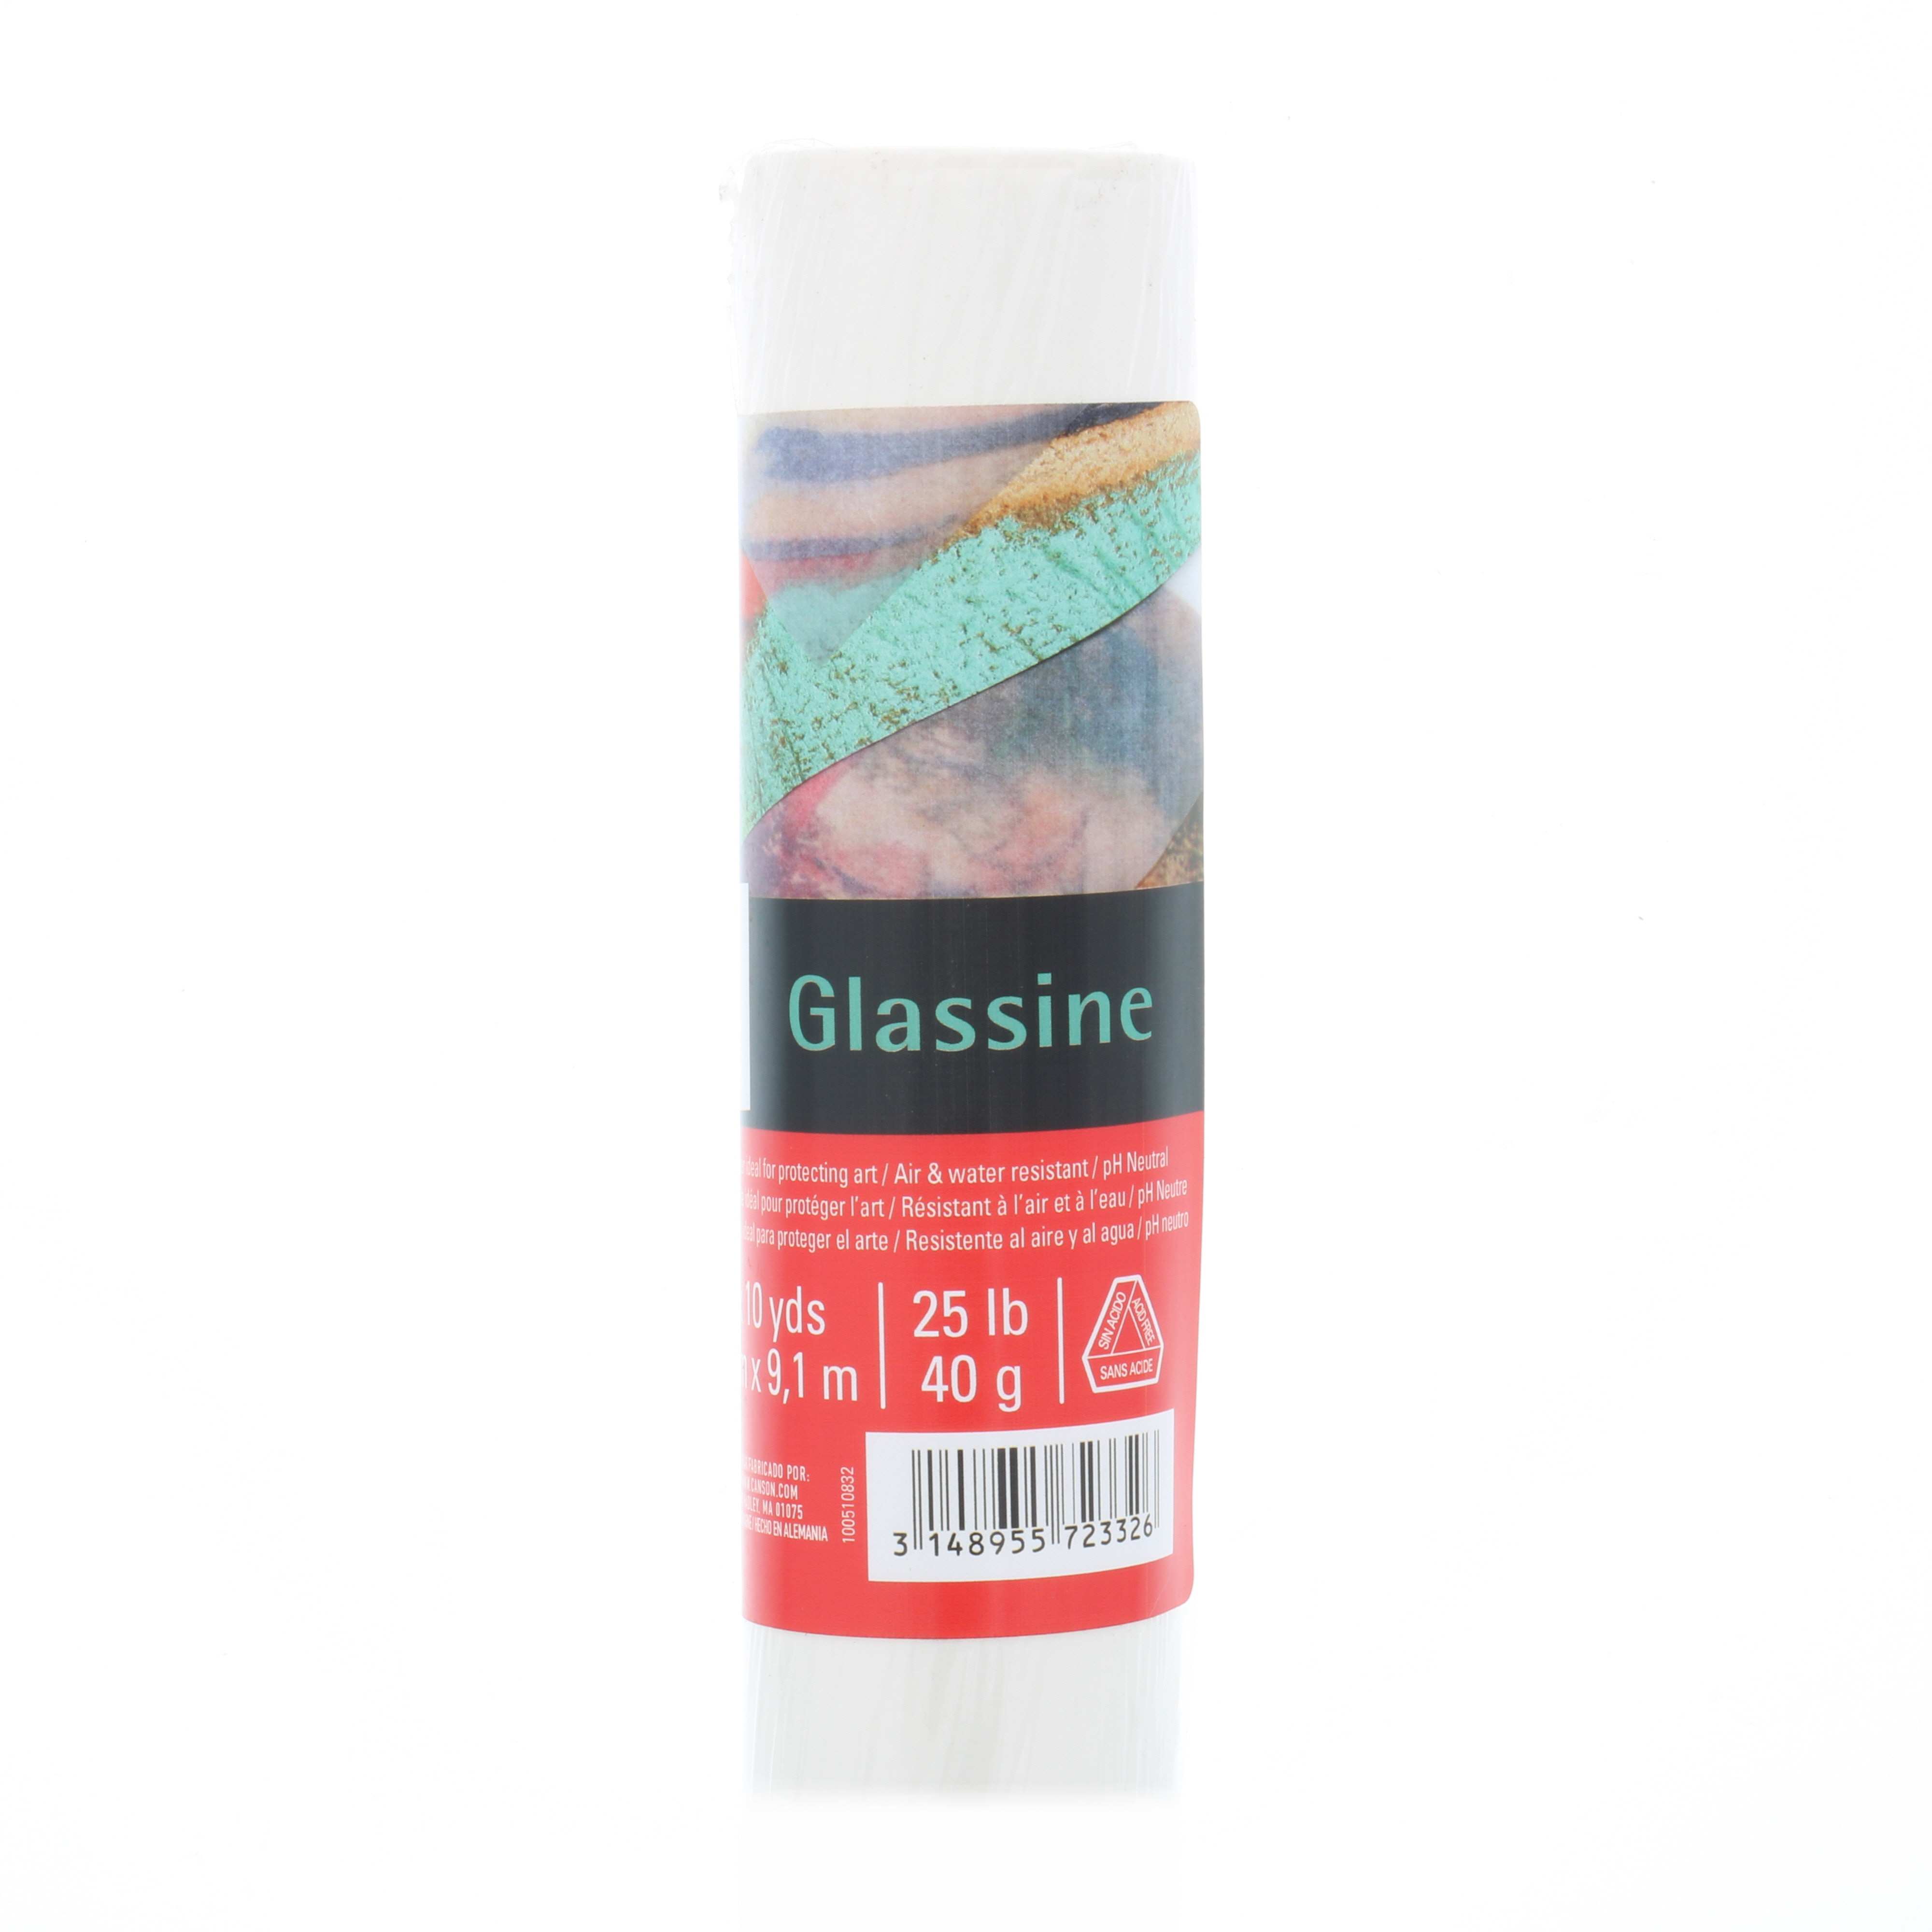 Canson Glassine Paper Roll, 36" x 10 yds. - image 1 of 4